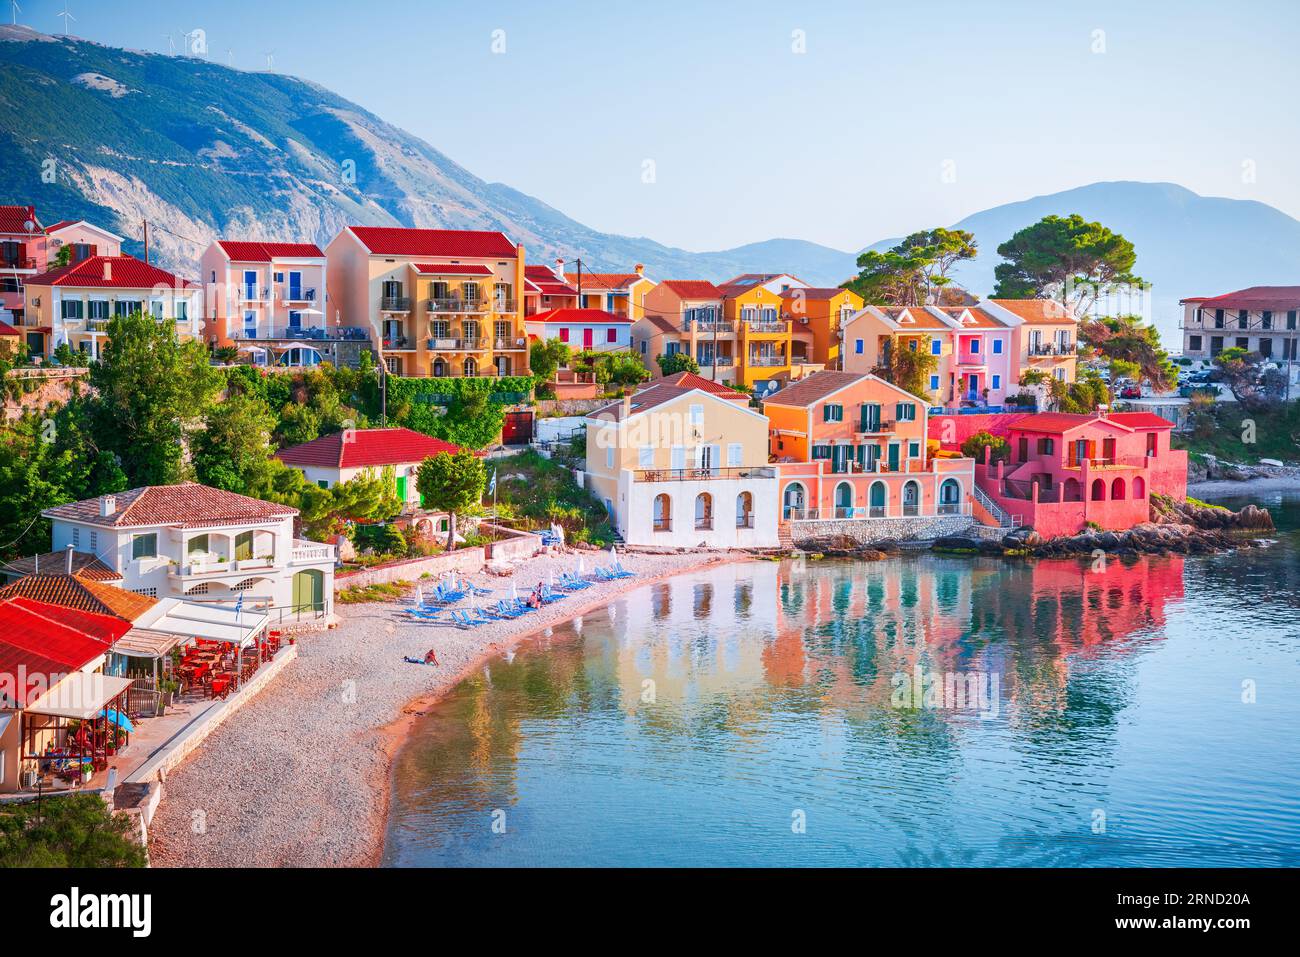 Assos, Kefalonia - Greece. Beautiful picturesque village nestled on the idyllic Ionian islands. Colorful houses and turquoise colored bay. Stock Photo